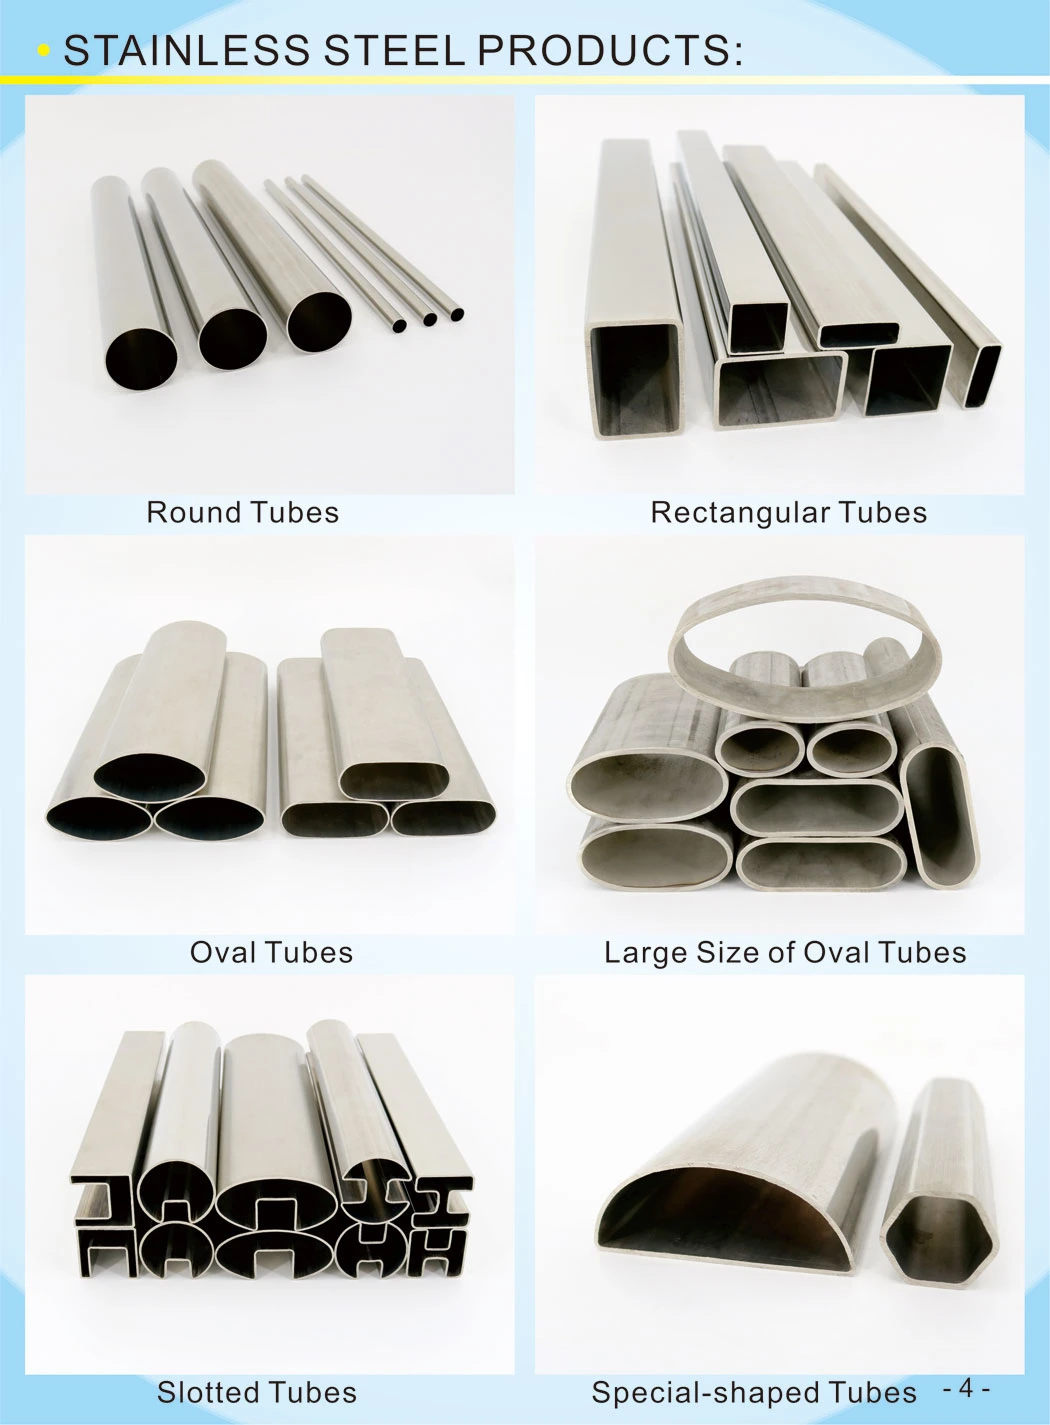 AISI 316L Stainless Steel Channelled Tubing for Glass Wall